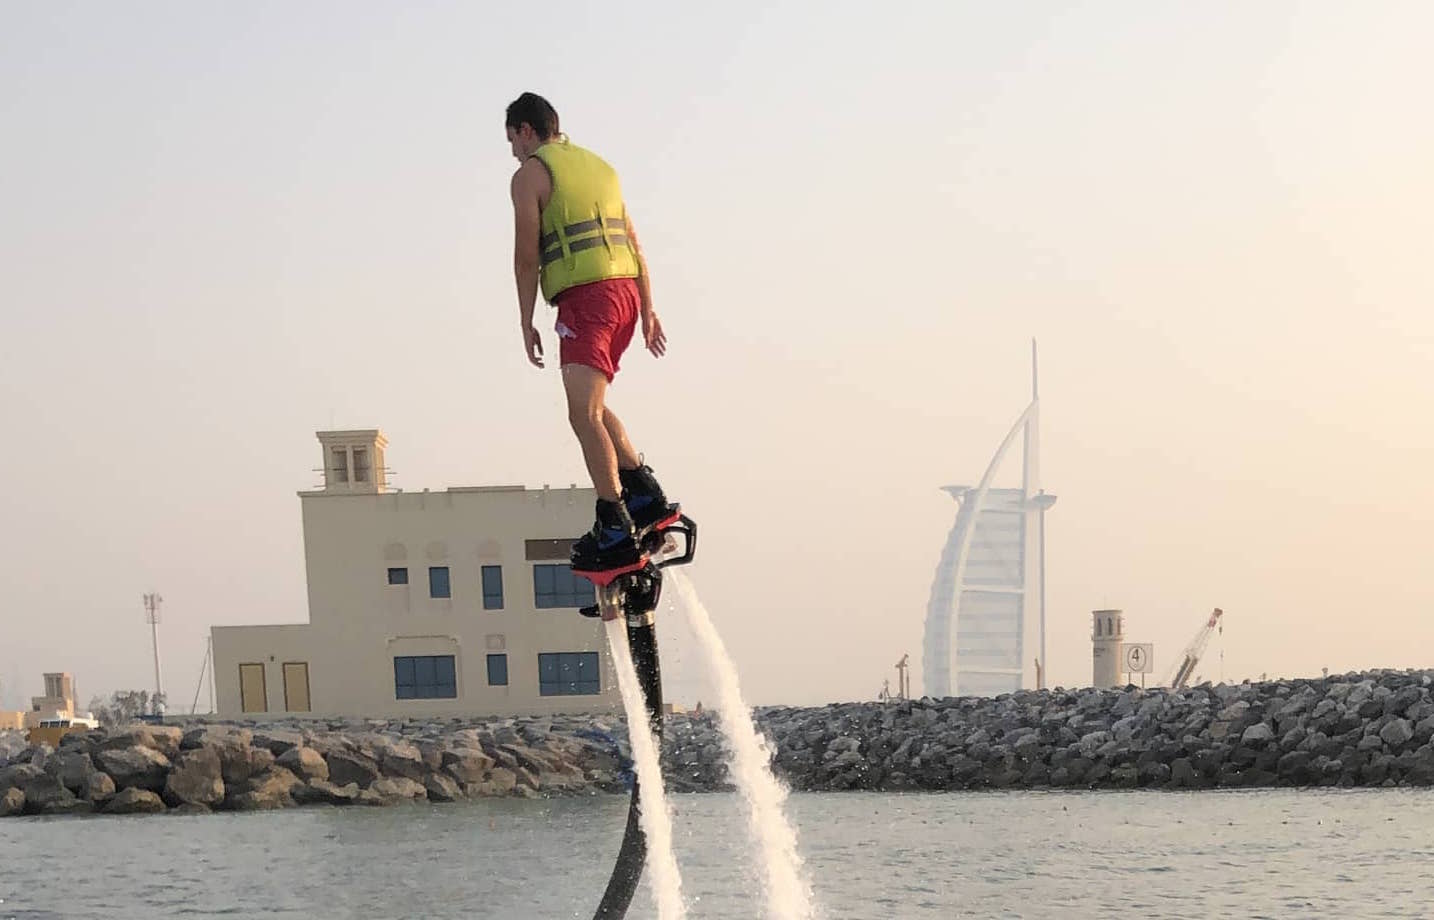 Have a great time doing fluboard in Dubai